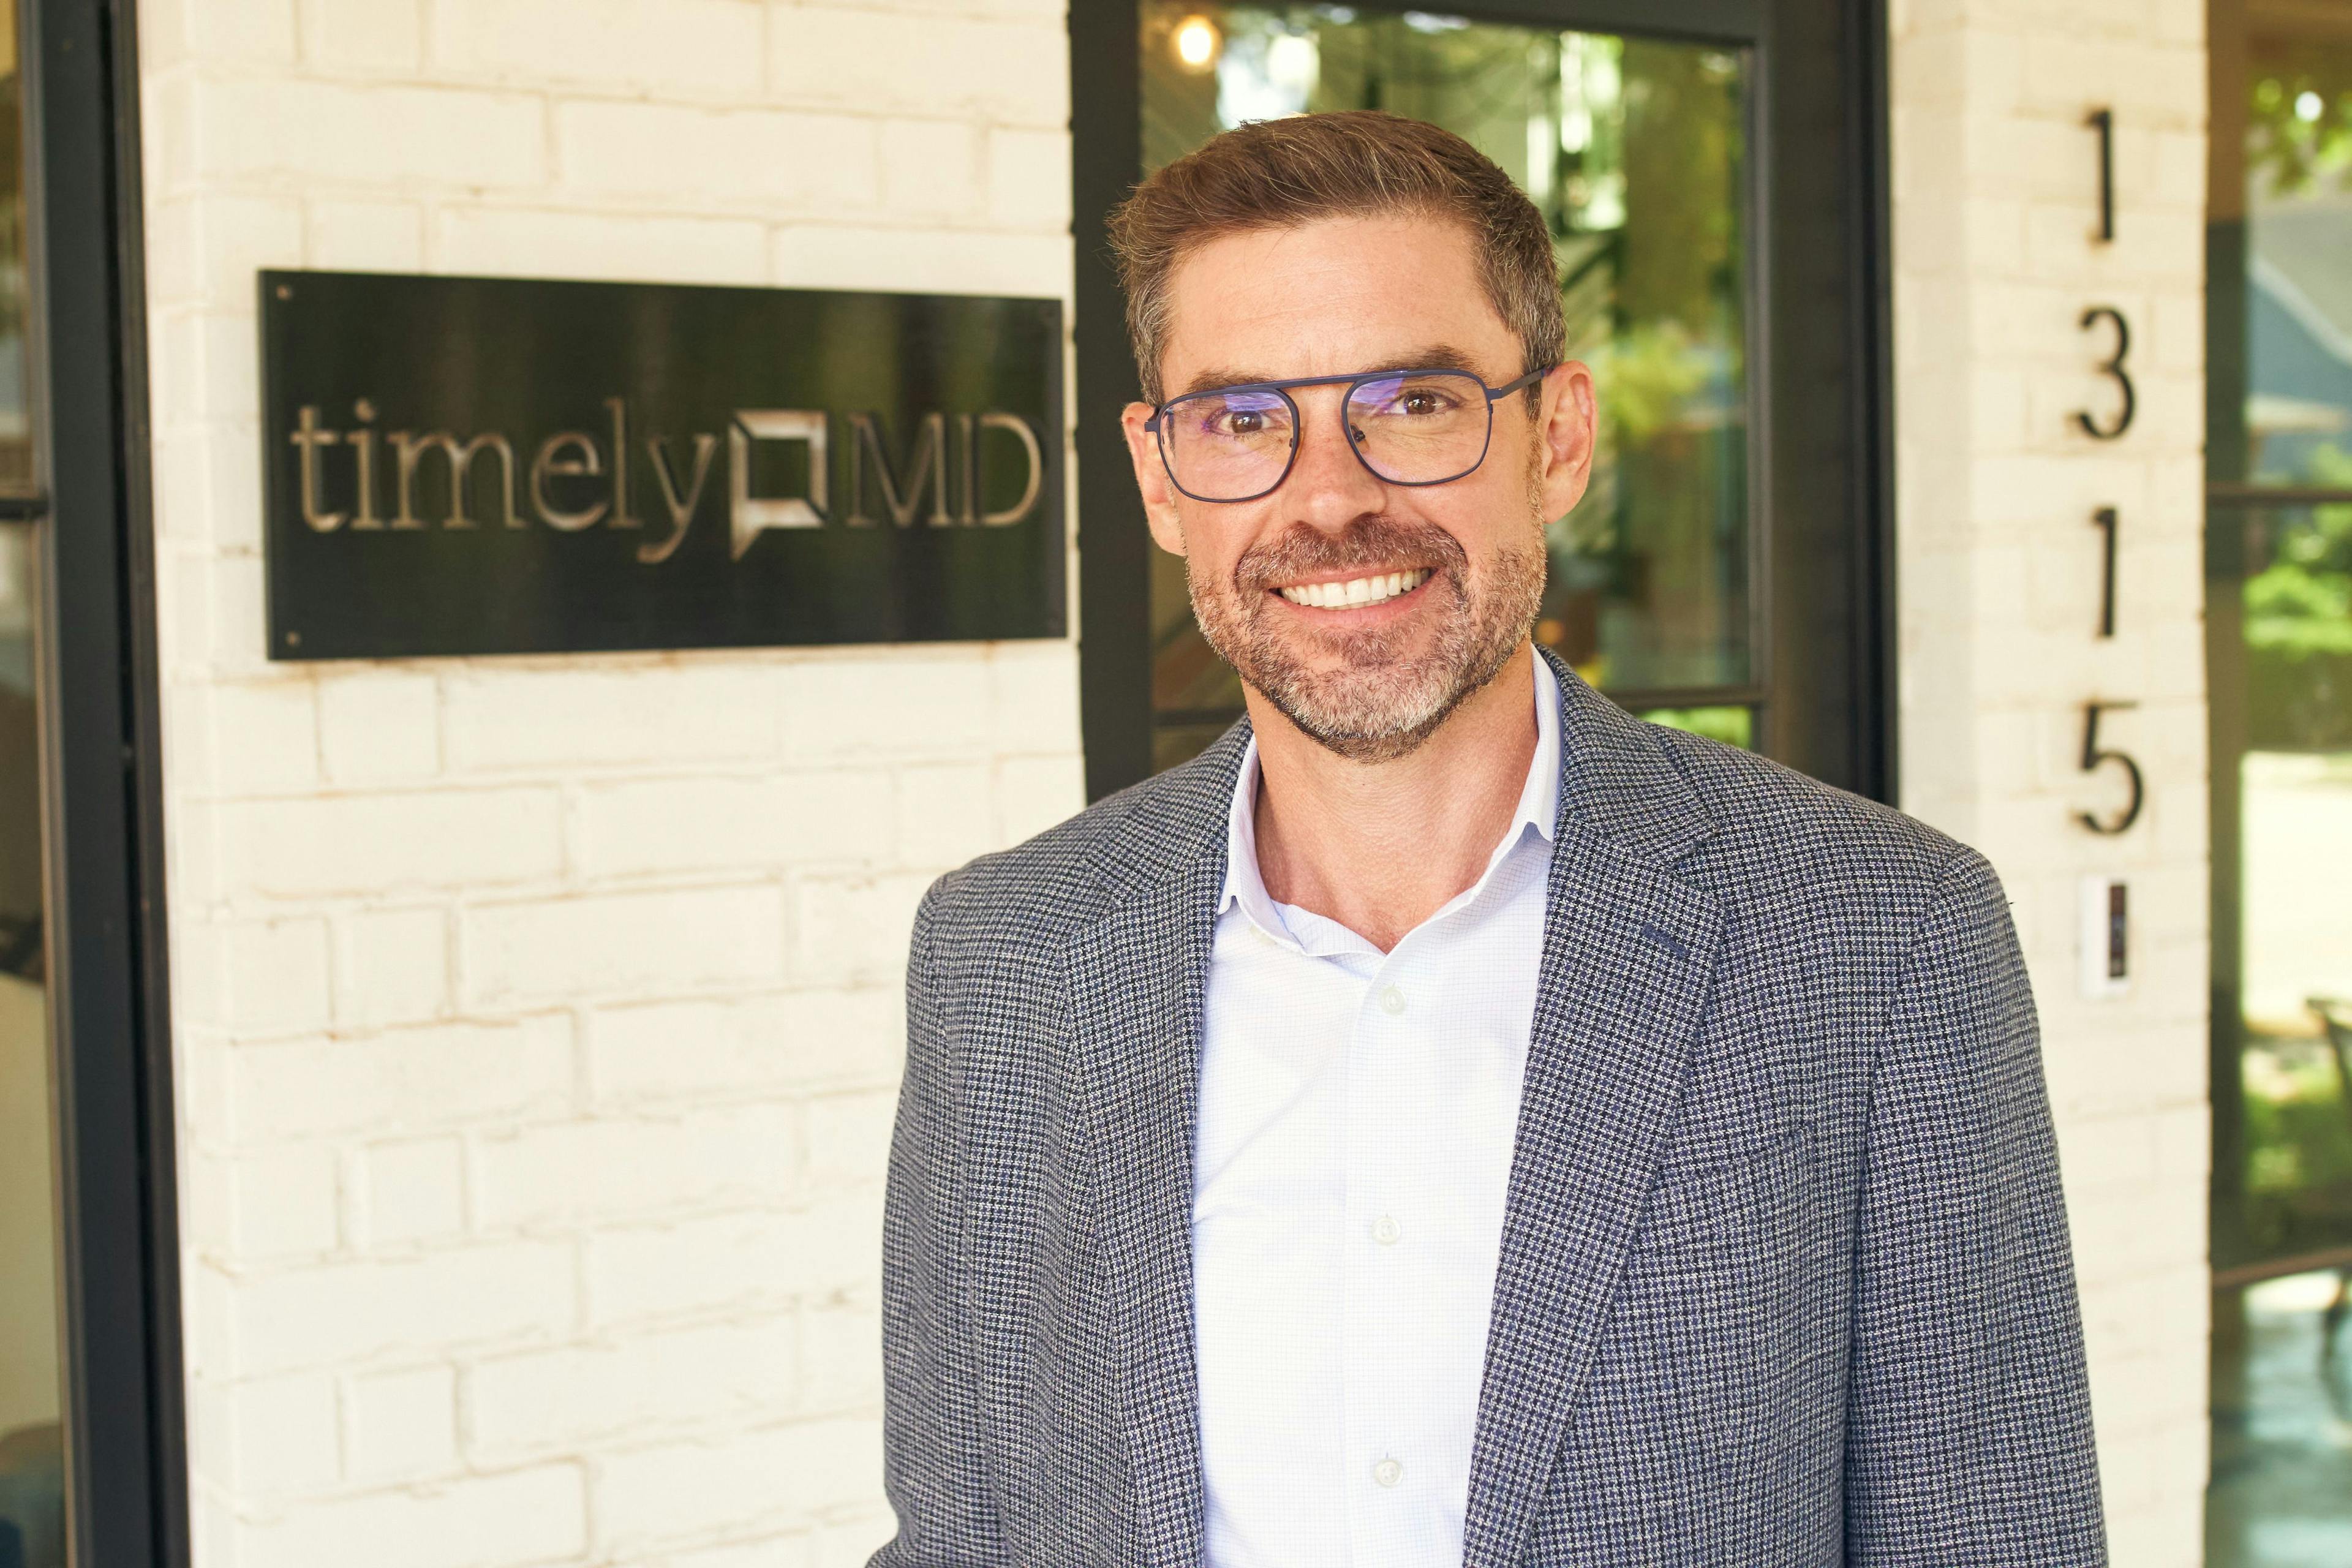 Telehealth and higher education: TimelyMD aims to be at the top of the class